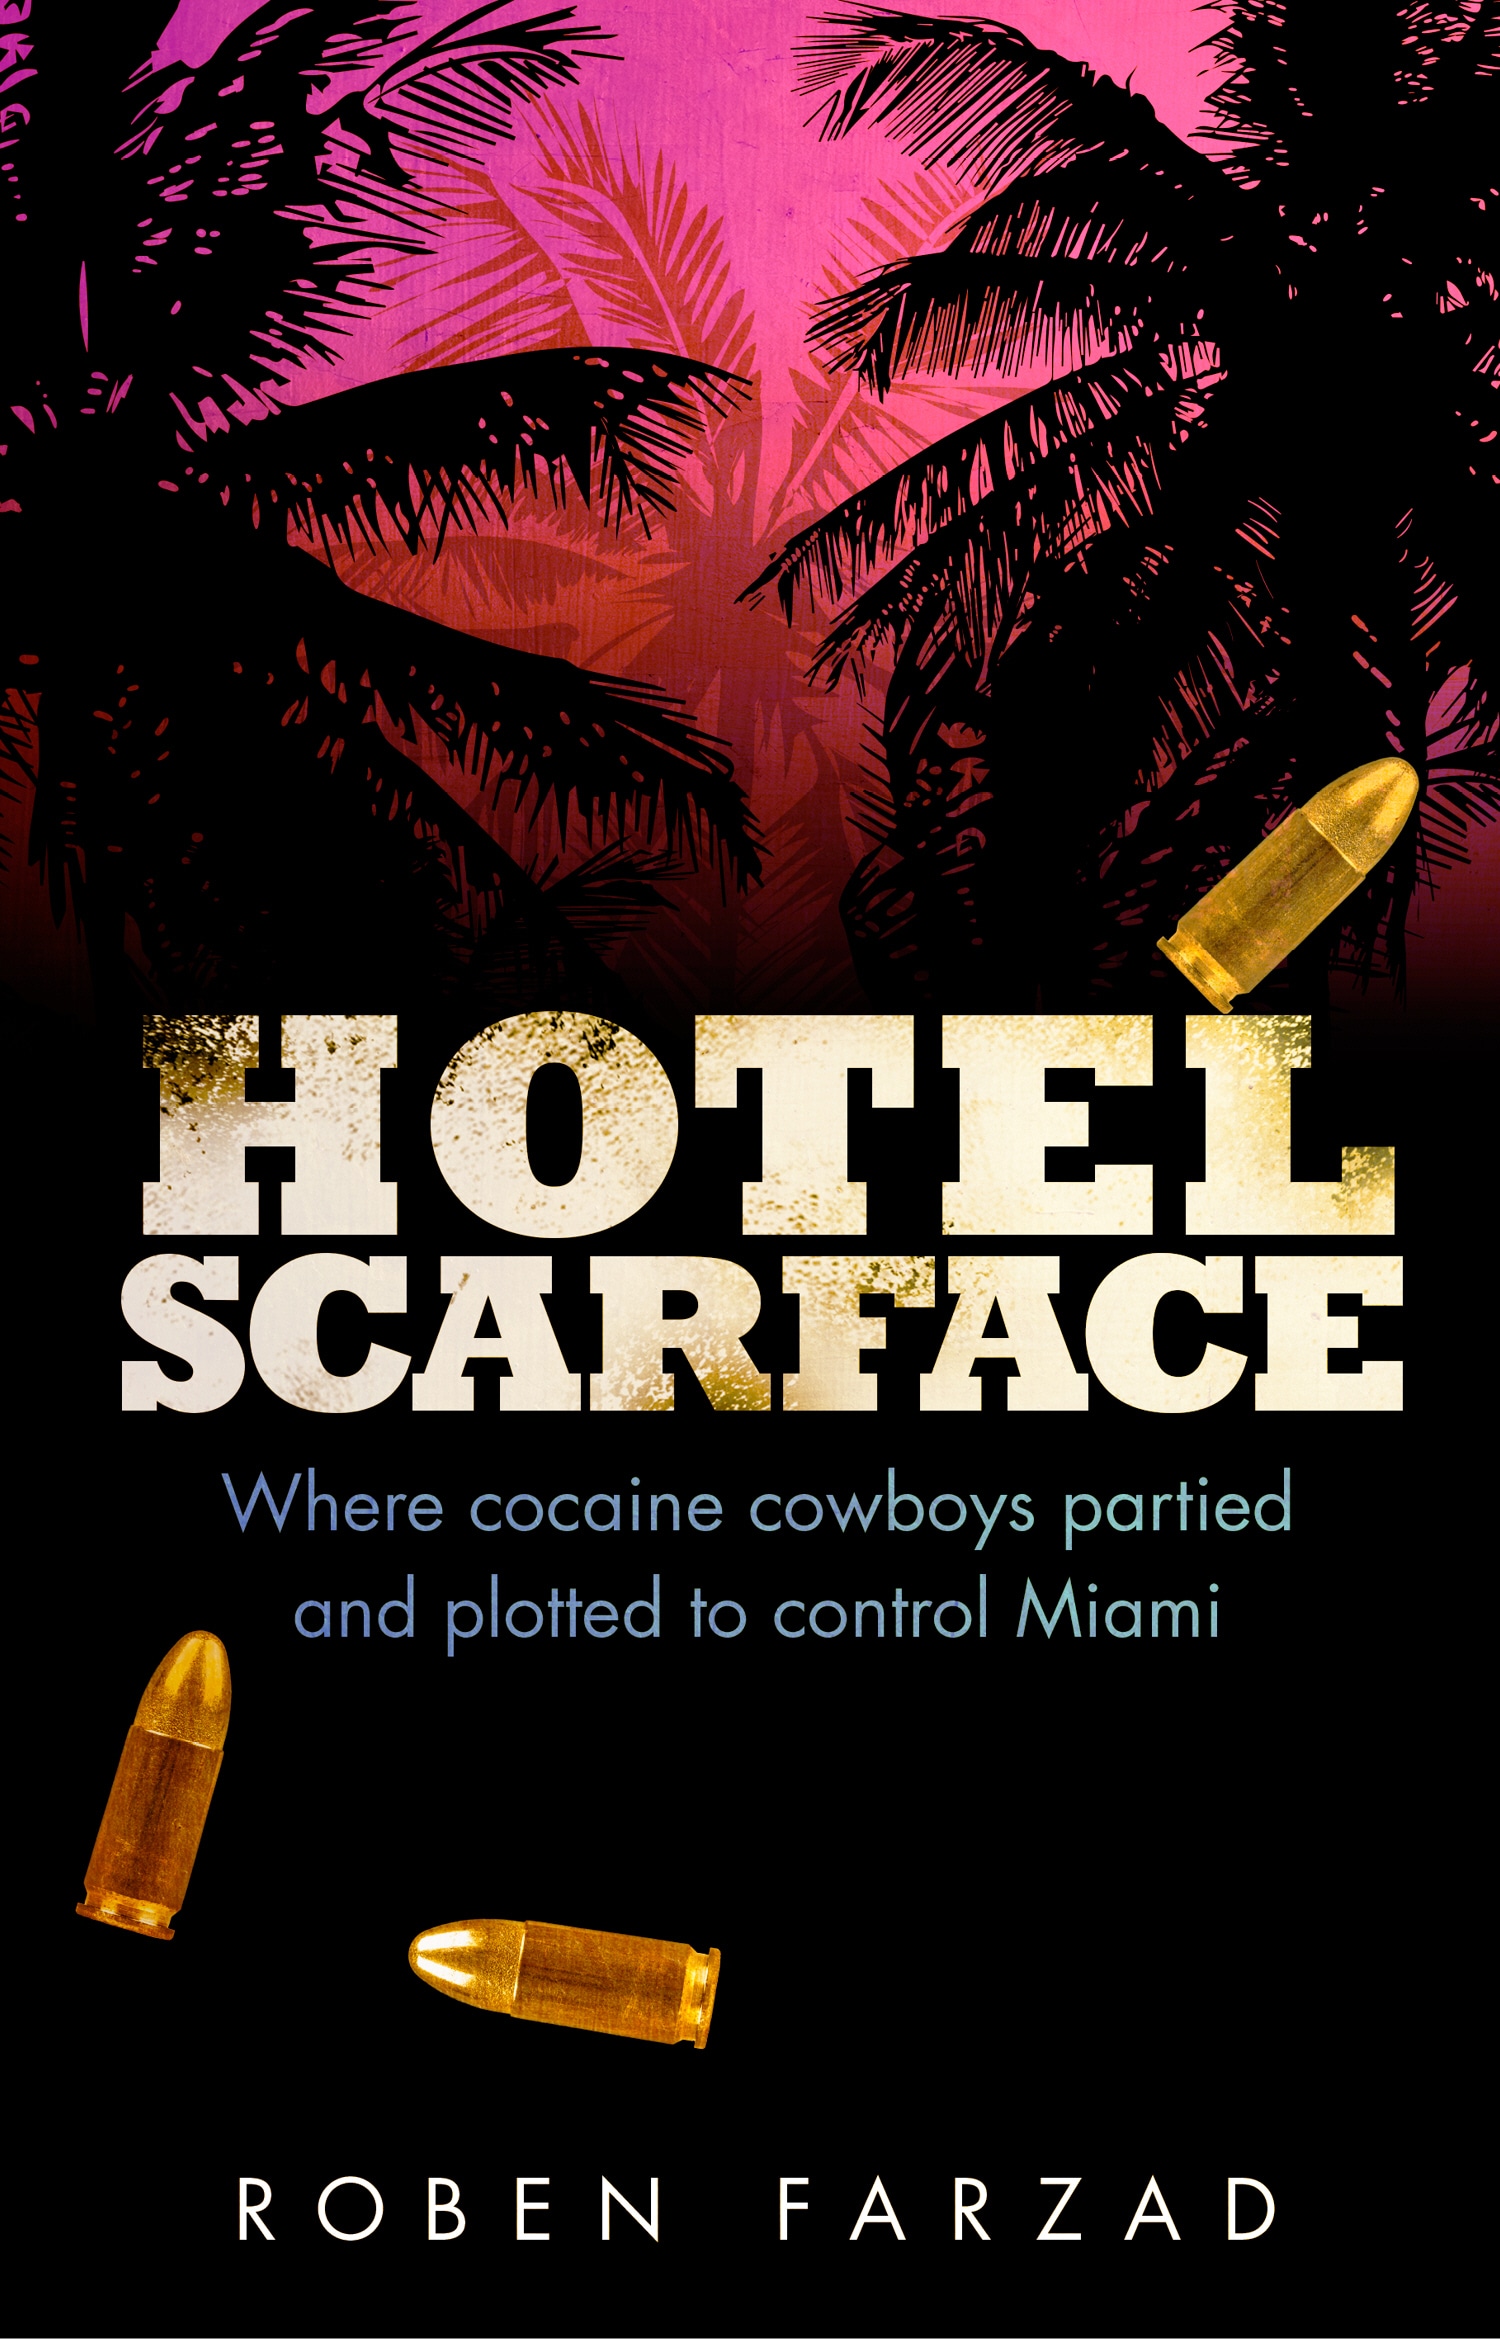 Book “Hotel Scarface” by Roben Farzad — May 2, 2019